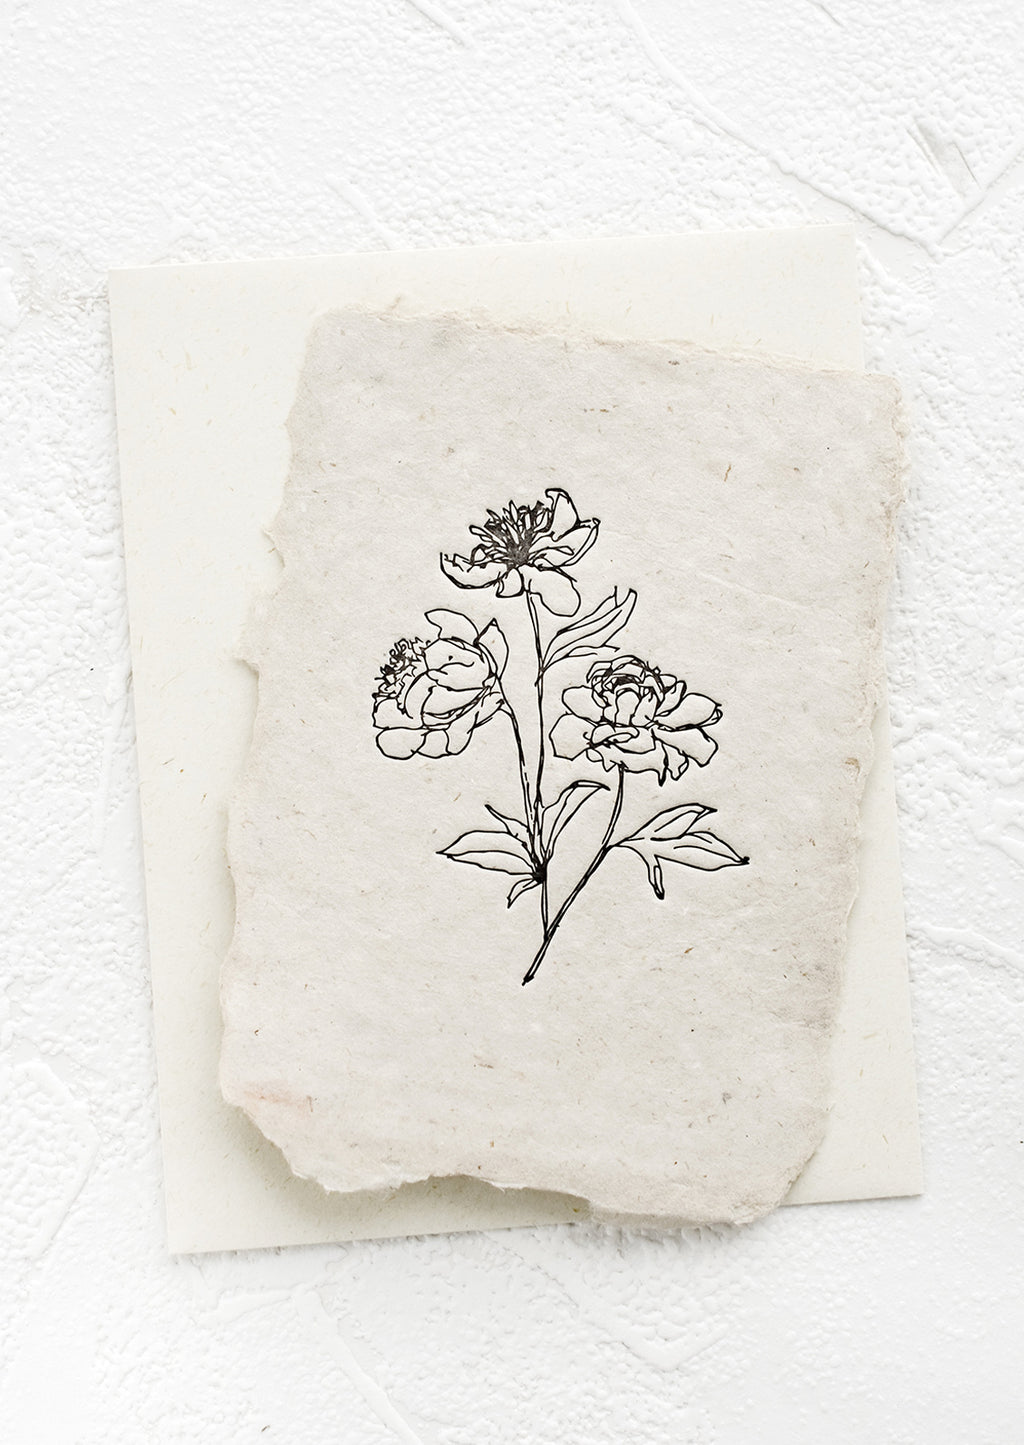 2: A greeting card made from handmade paper with a letterpress printed image of peony stems.